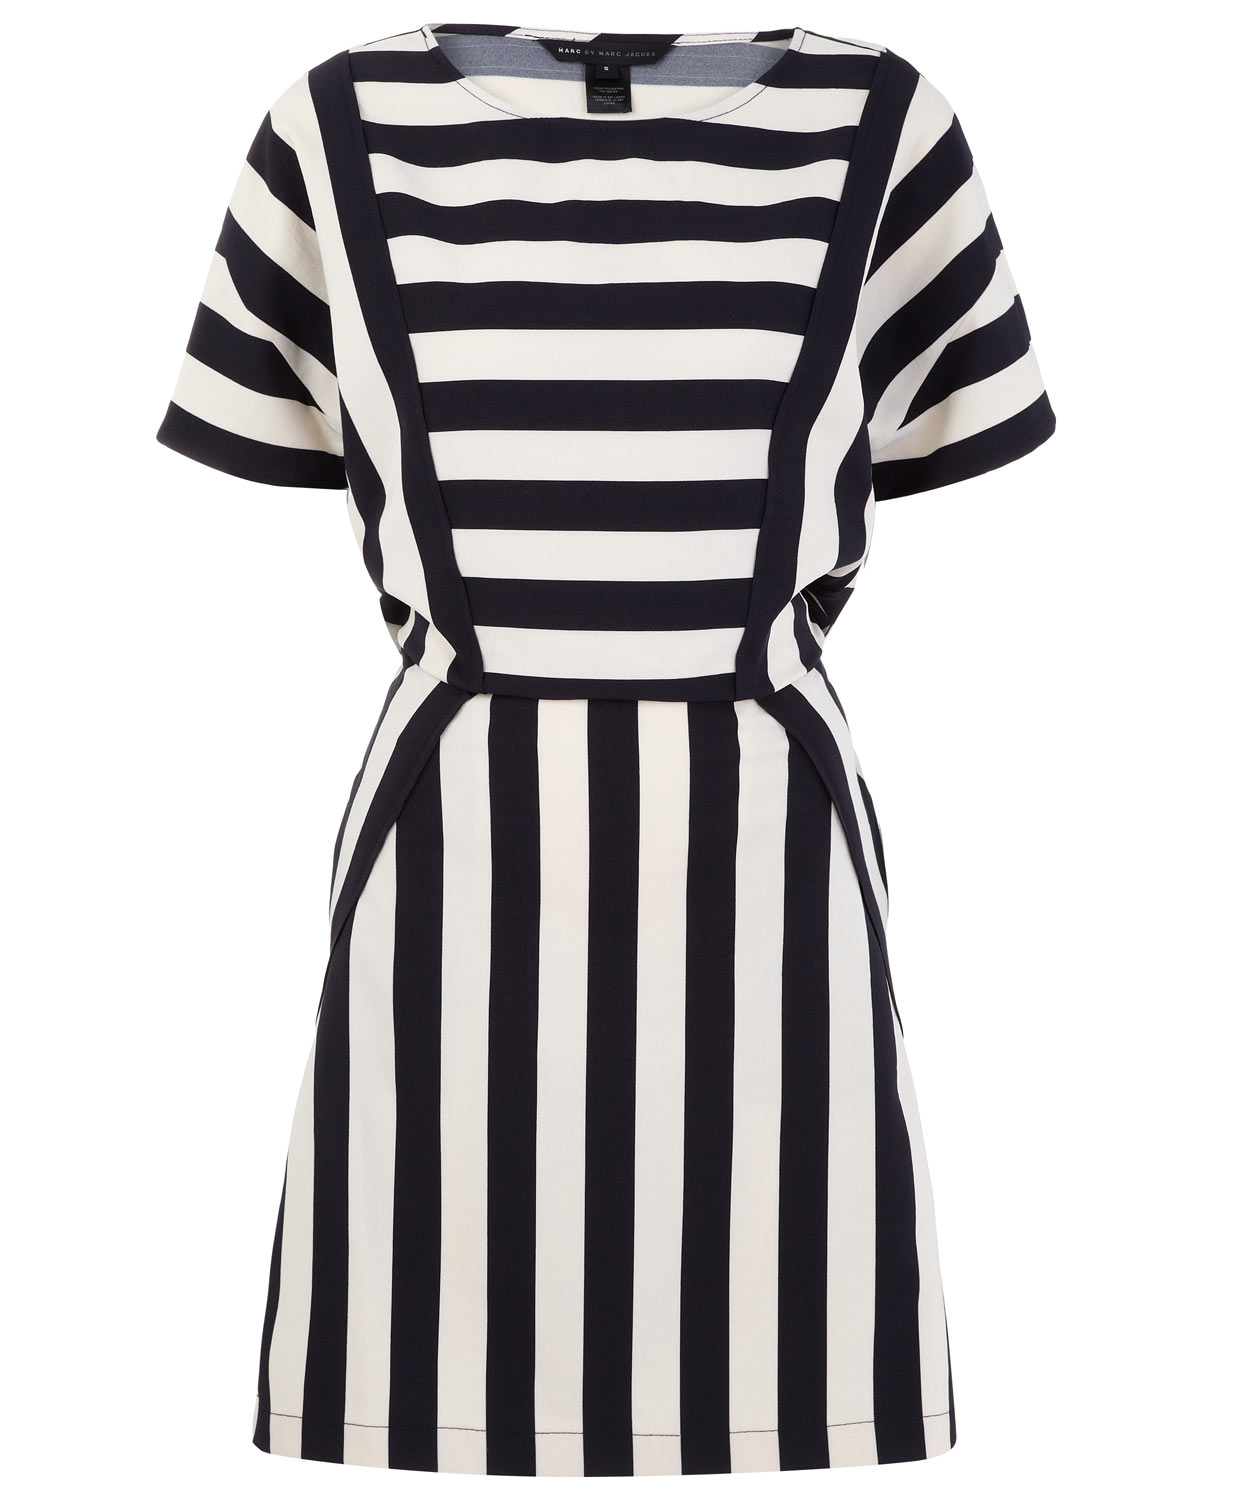 Lyst - Marc By Marc Jacobs Navy and Cream Striped Scooter Dress in White